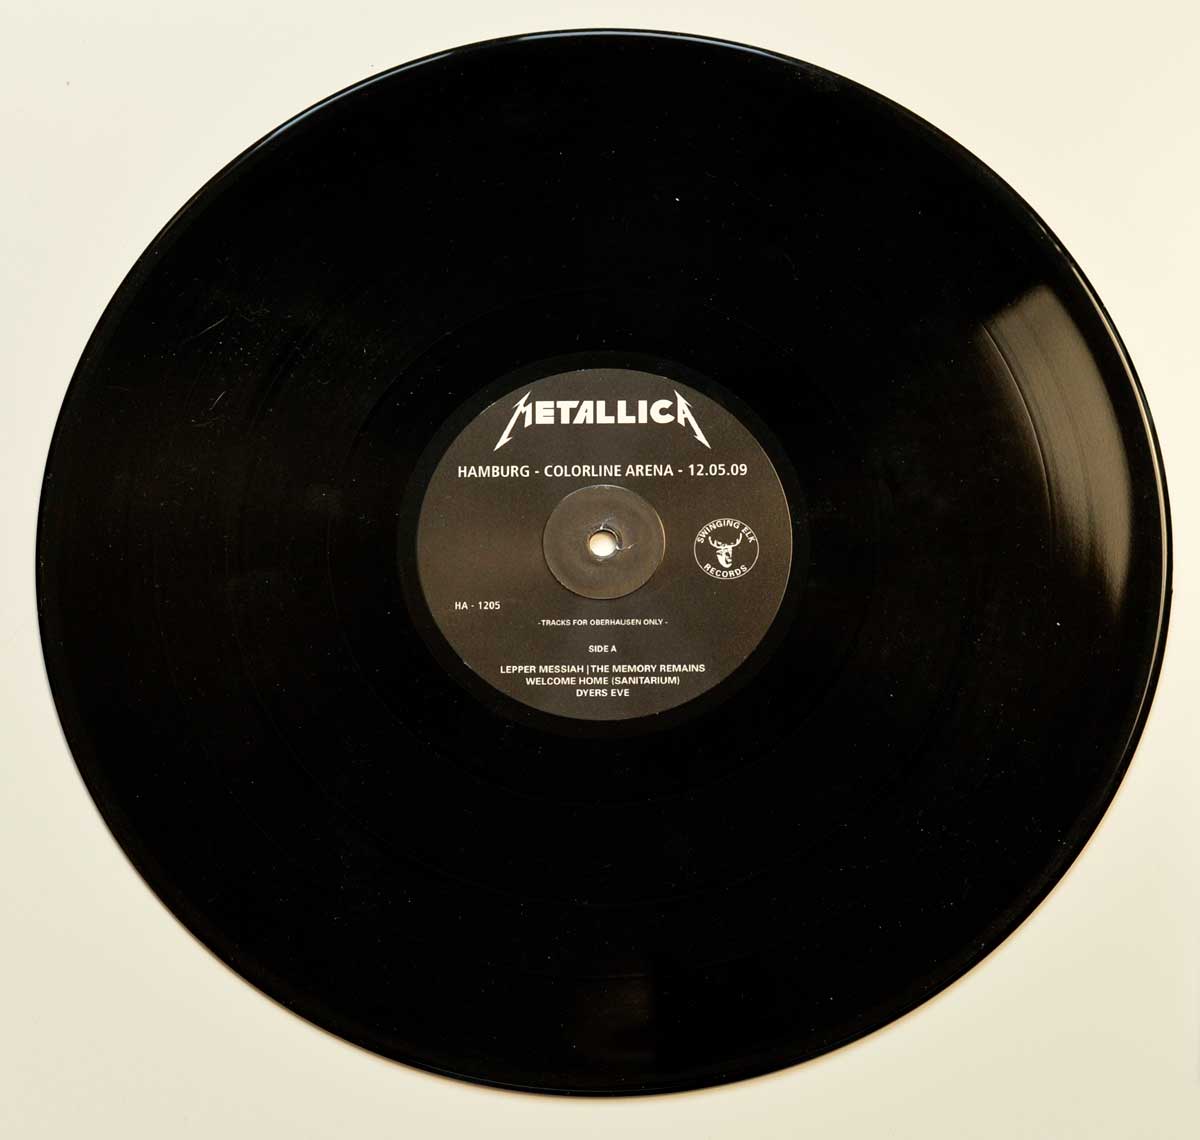 Photo of record side one of METALLICA - Hamburg Colorline 12 May 2009 